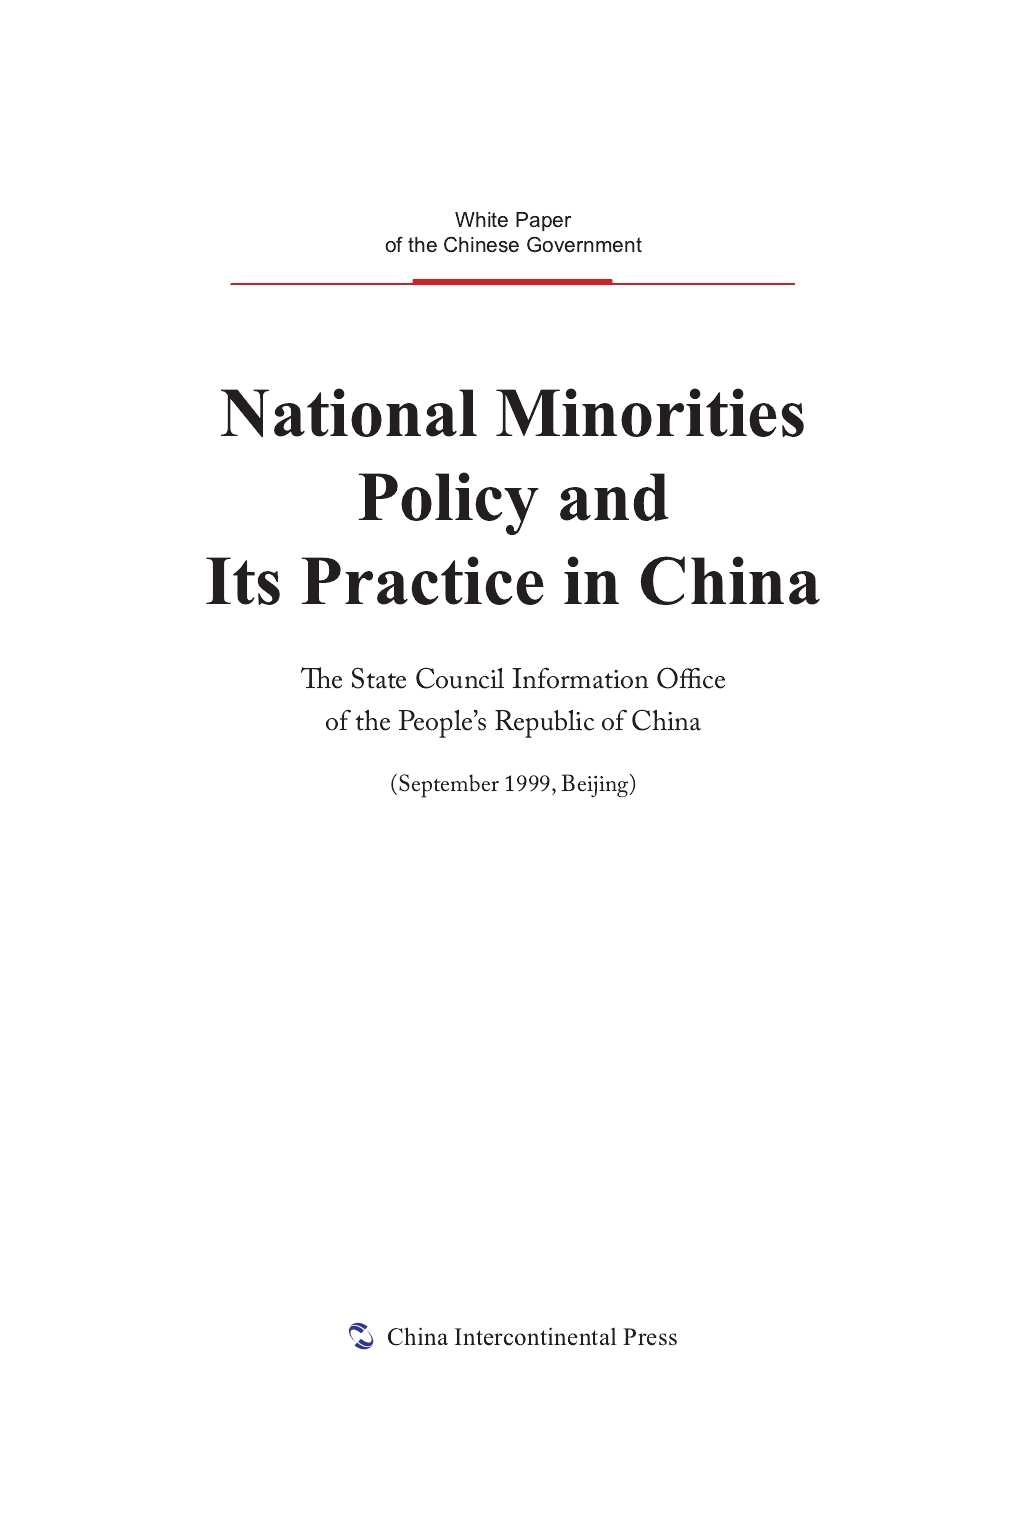 National Minorities Policy and Its Practice in China